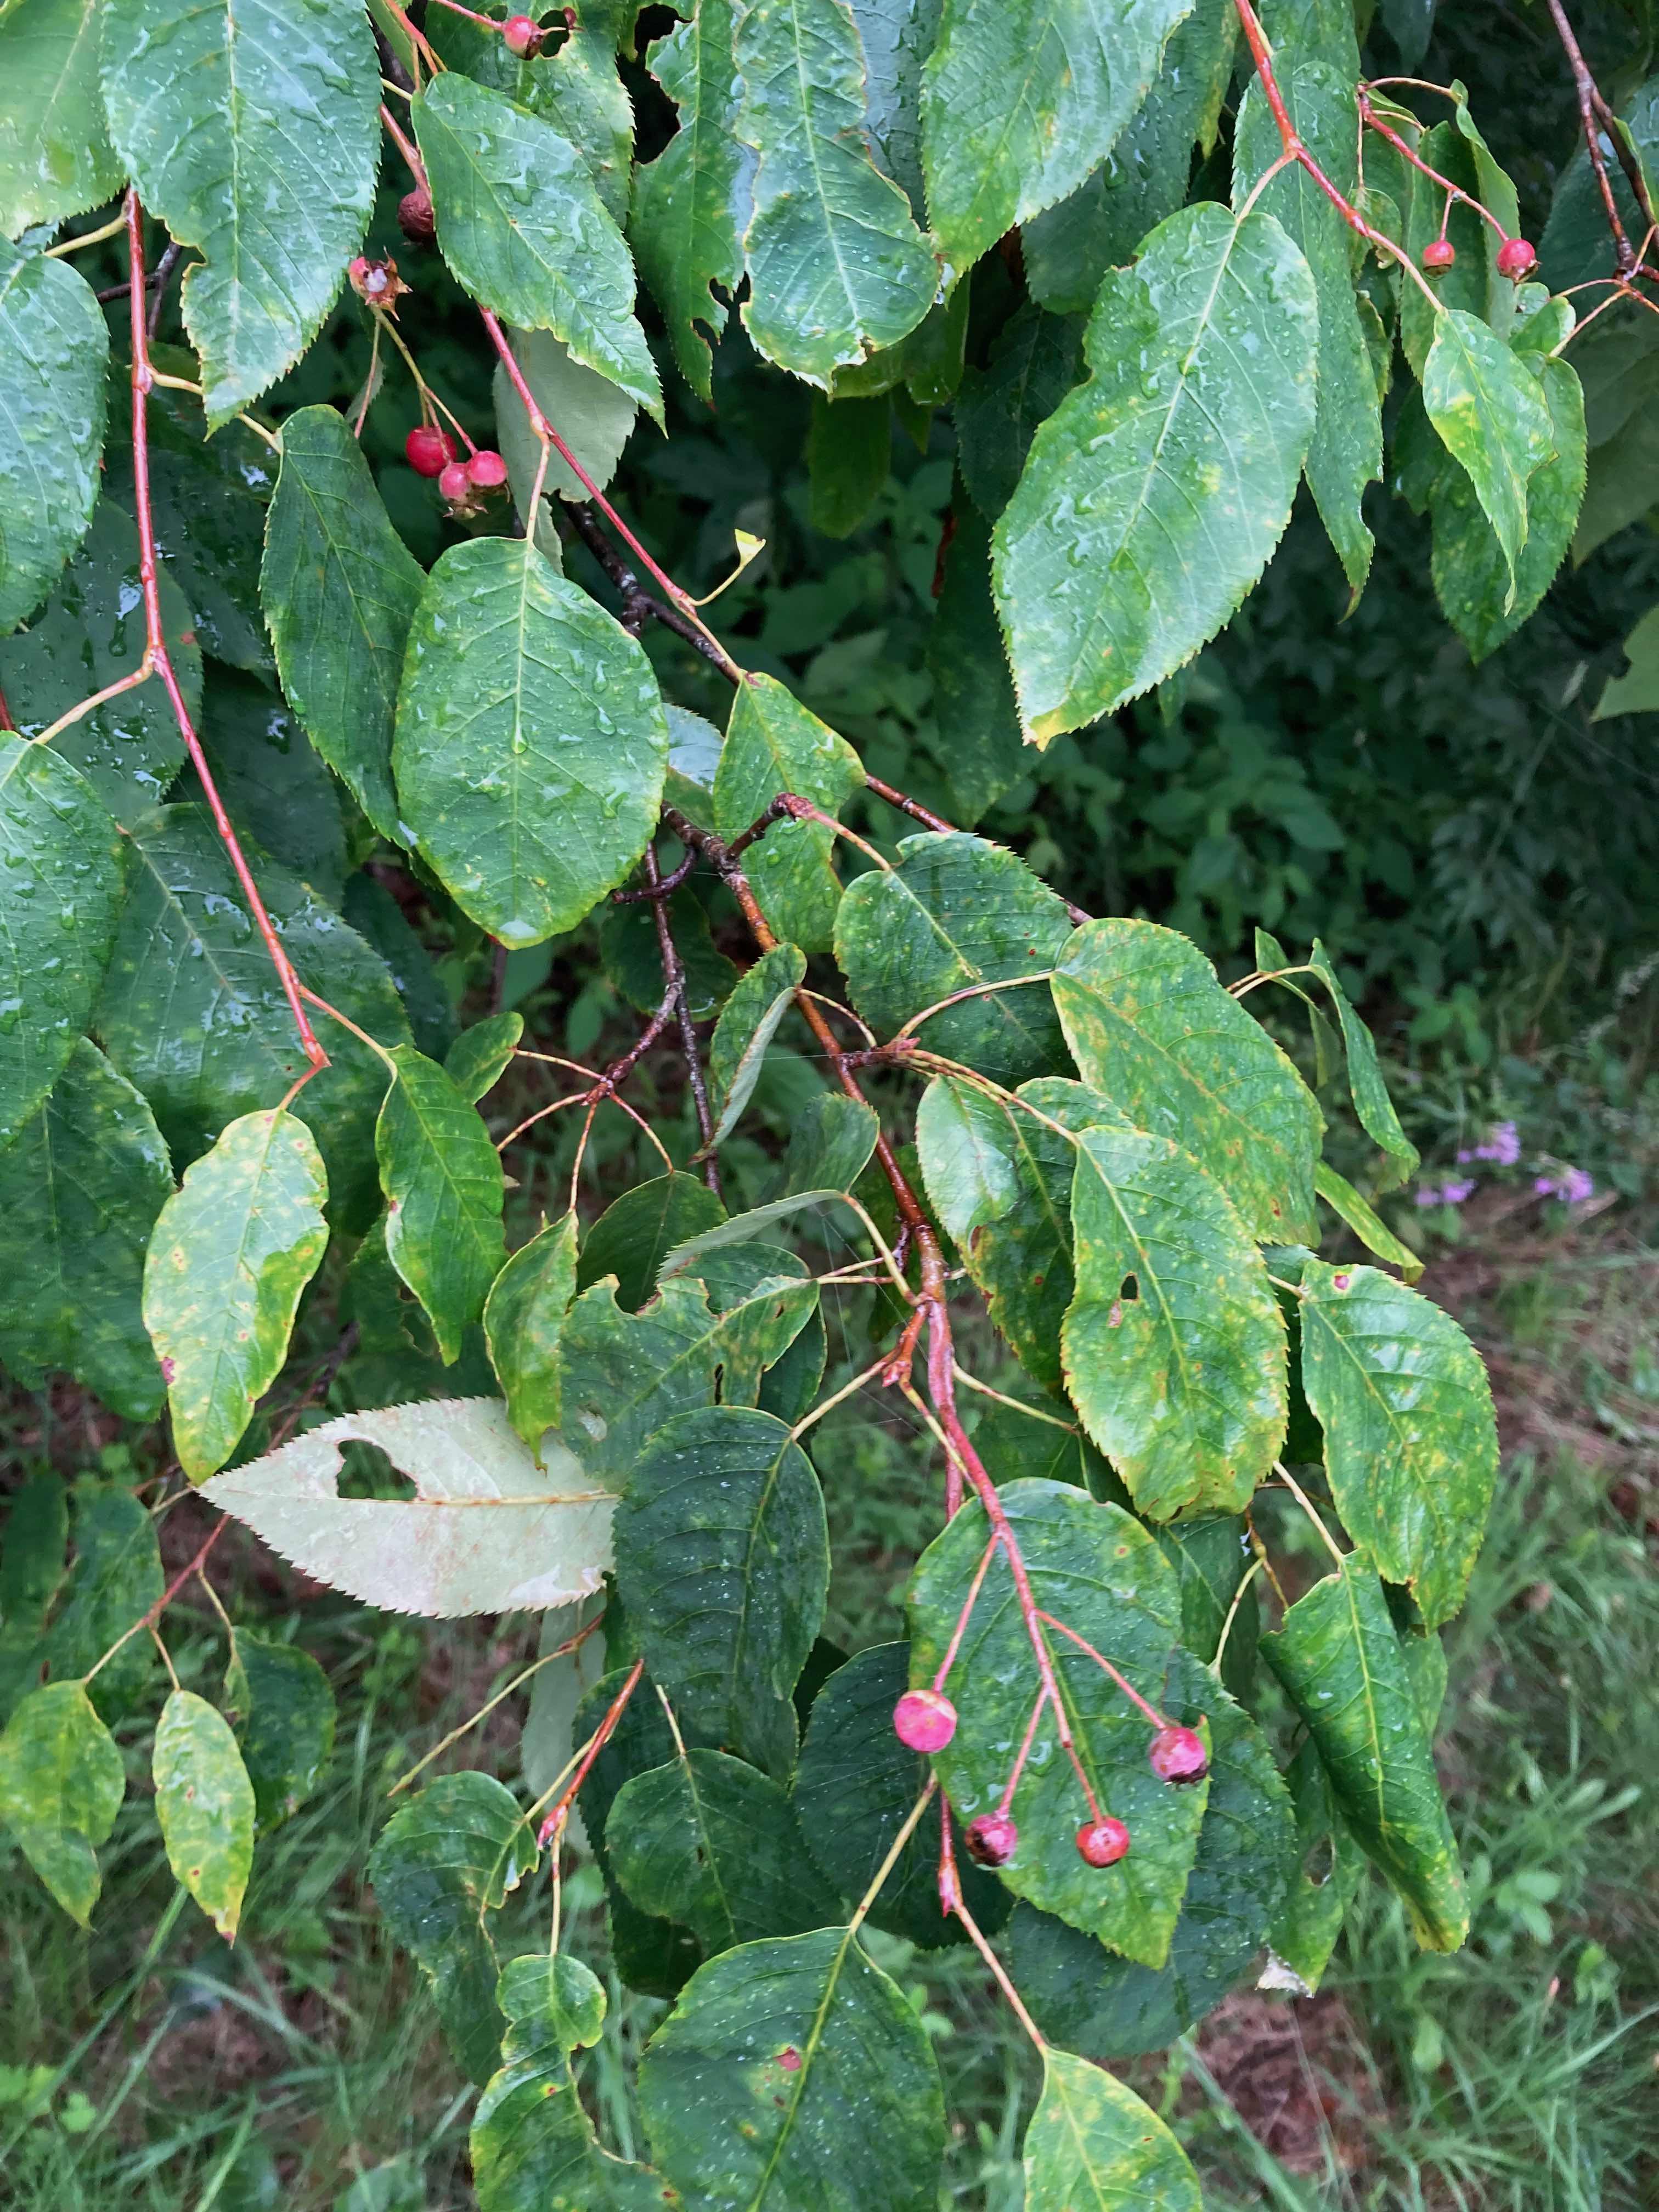 The Scientific Name is Amelanchier arborea. You will likely hear them called Downy Serviceberry, Shadbush, Shadtree, Sarvis Tree. This picture shows the Leaves are finely serrated and are downy on the underside. of Amelanchier arborea